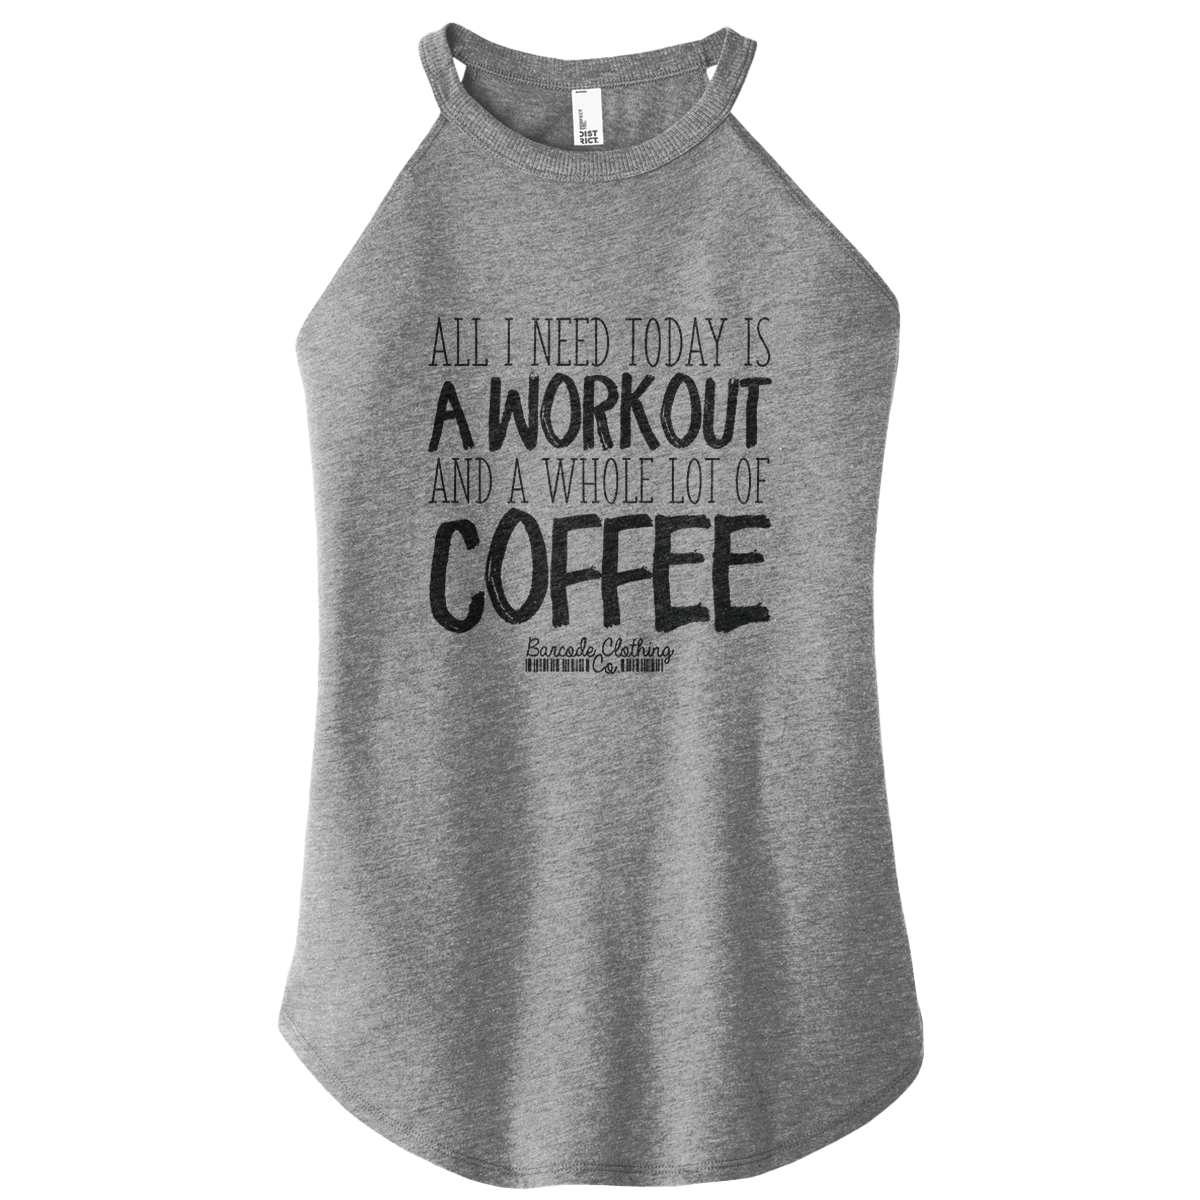 All I Need Today Is a Workout Coffee Rocker Tank